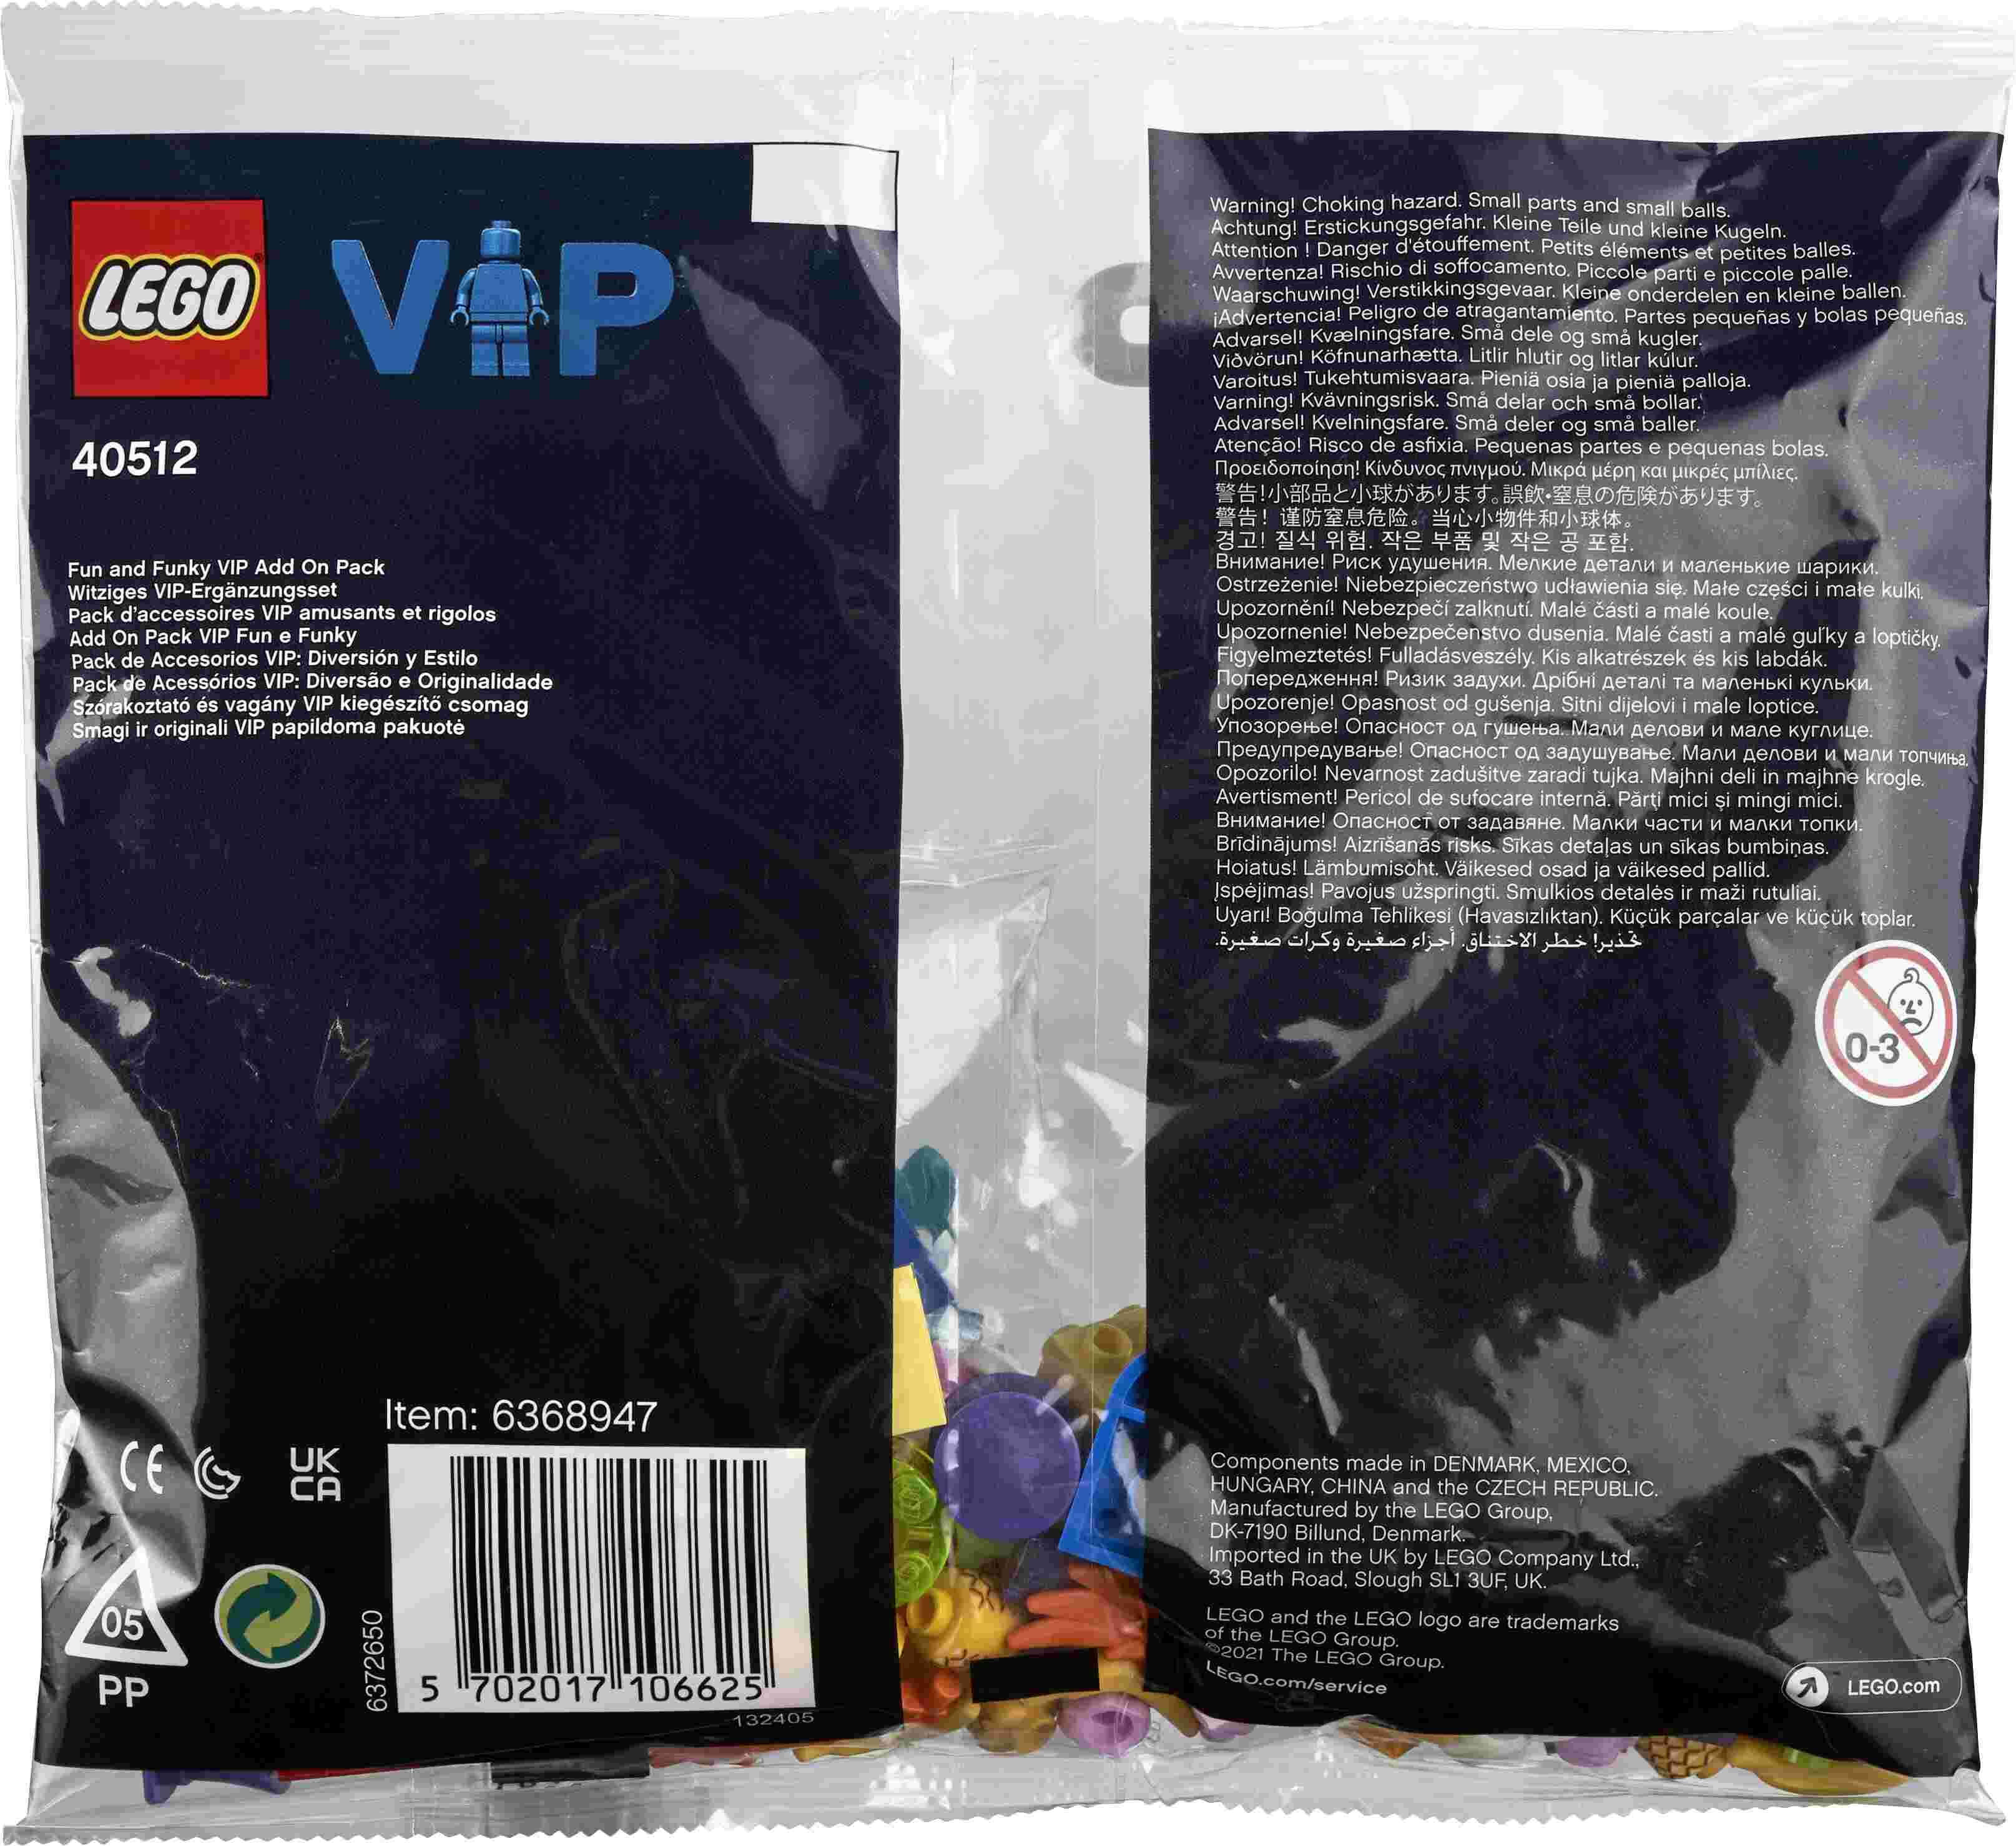 LEGO 40512 Fun and Funky VIP Add on Pack Cool Polybag With Random 6+ 148 Pieces